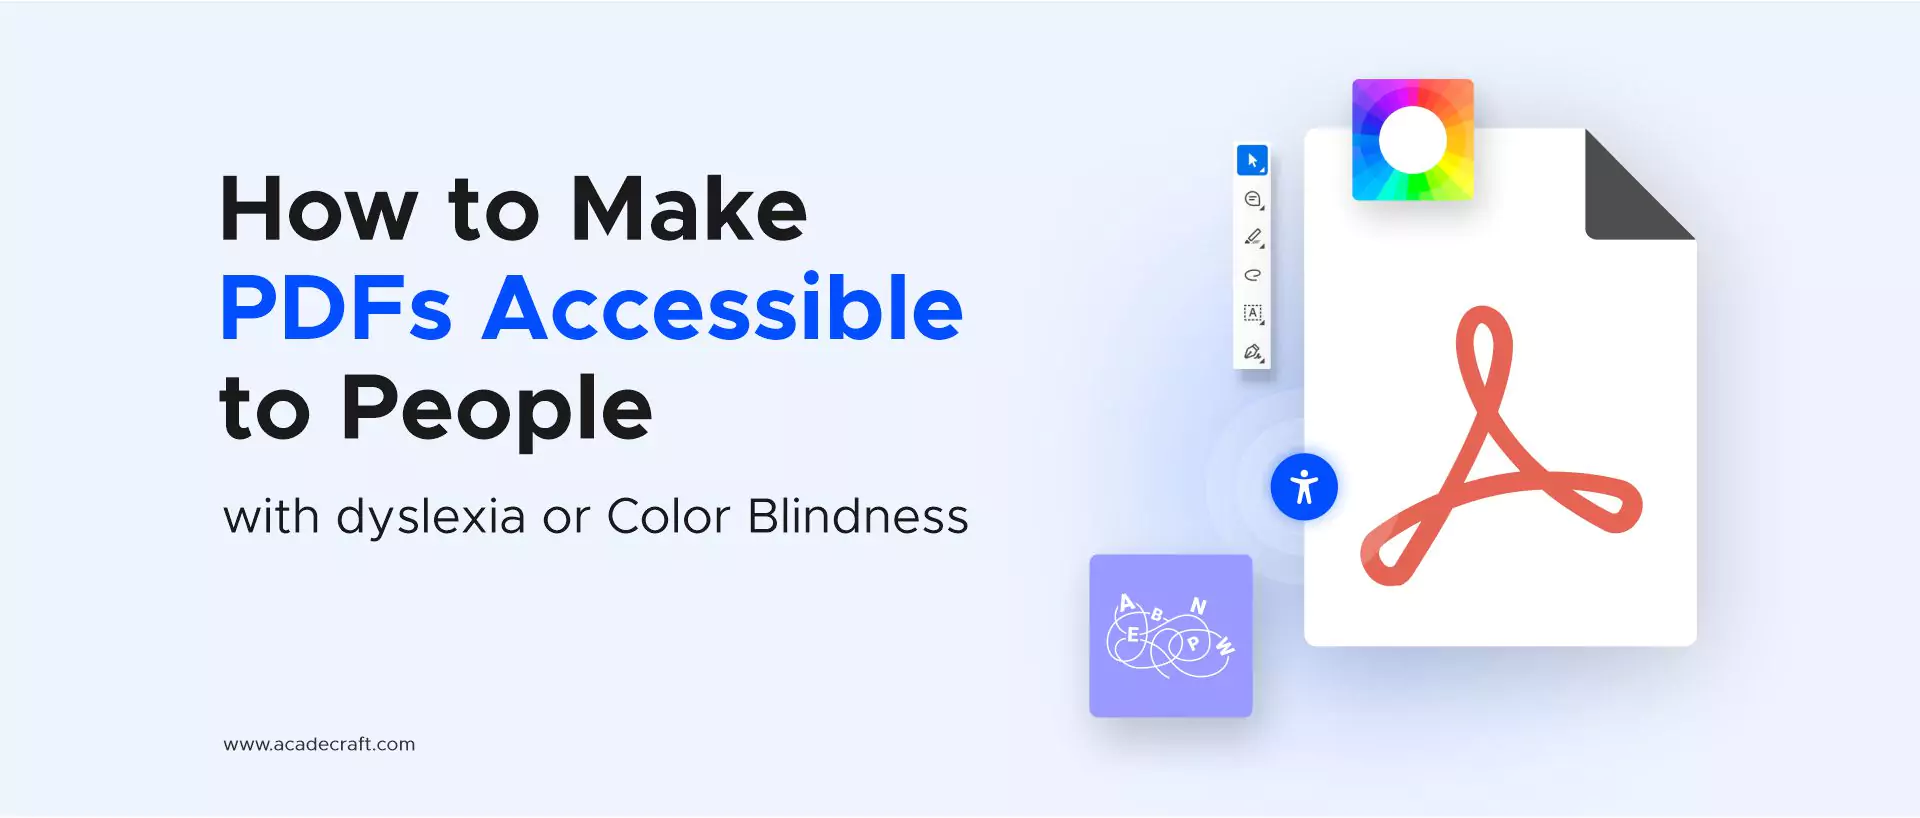 Make PDF Accessible for People with Dyslexia or Color Blindness